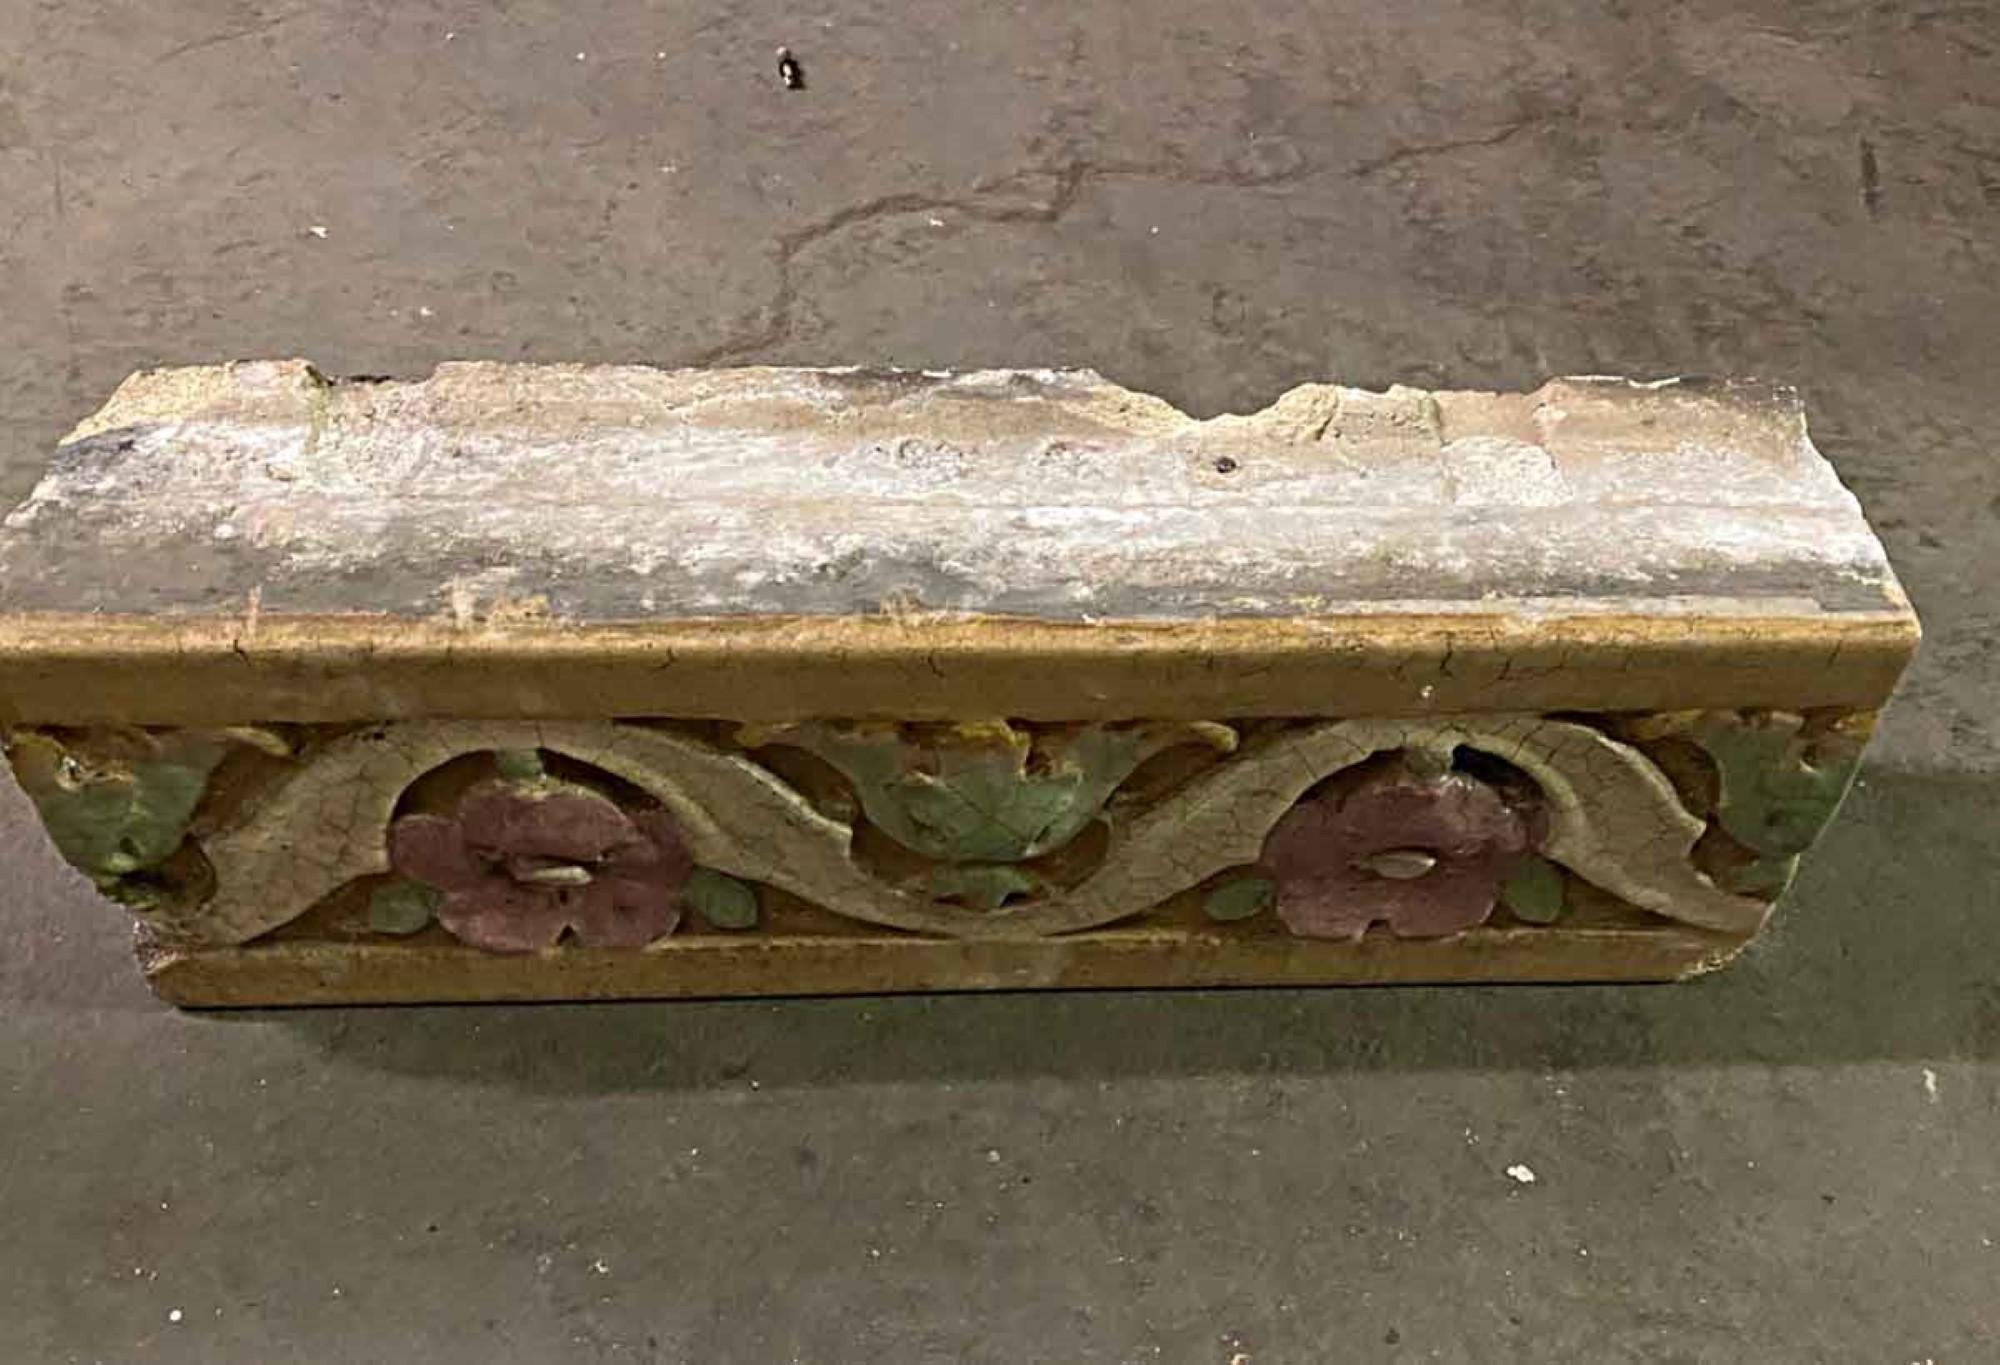 1920s glazed polychrome terracotta floral trim pieces from a building facade. Some small chipping. Small quantity available at time of posting. Priced each. Please inquire. Please note, this item is located in our Scranton, PA location.